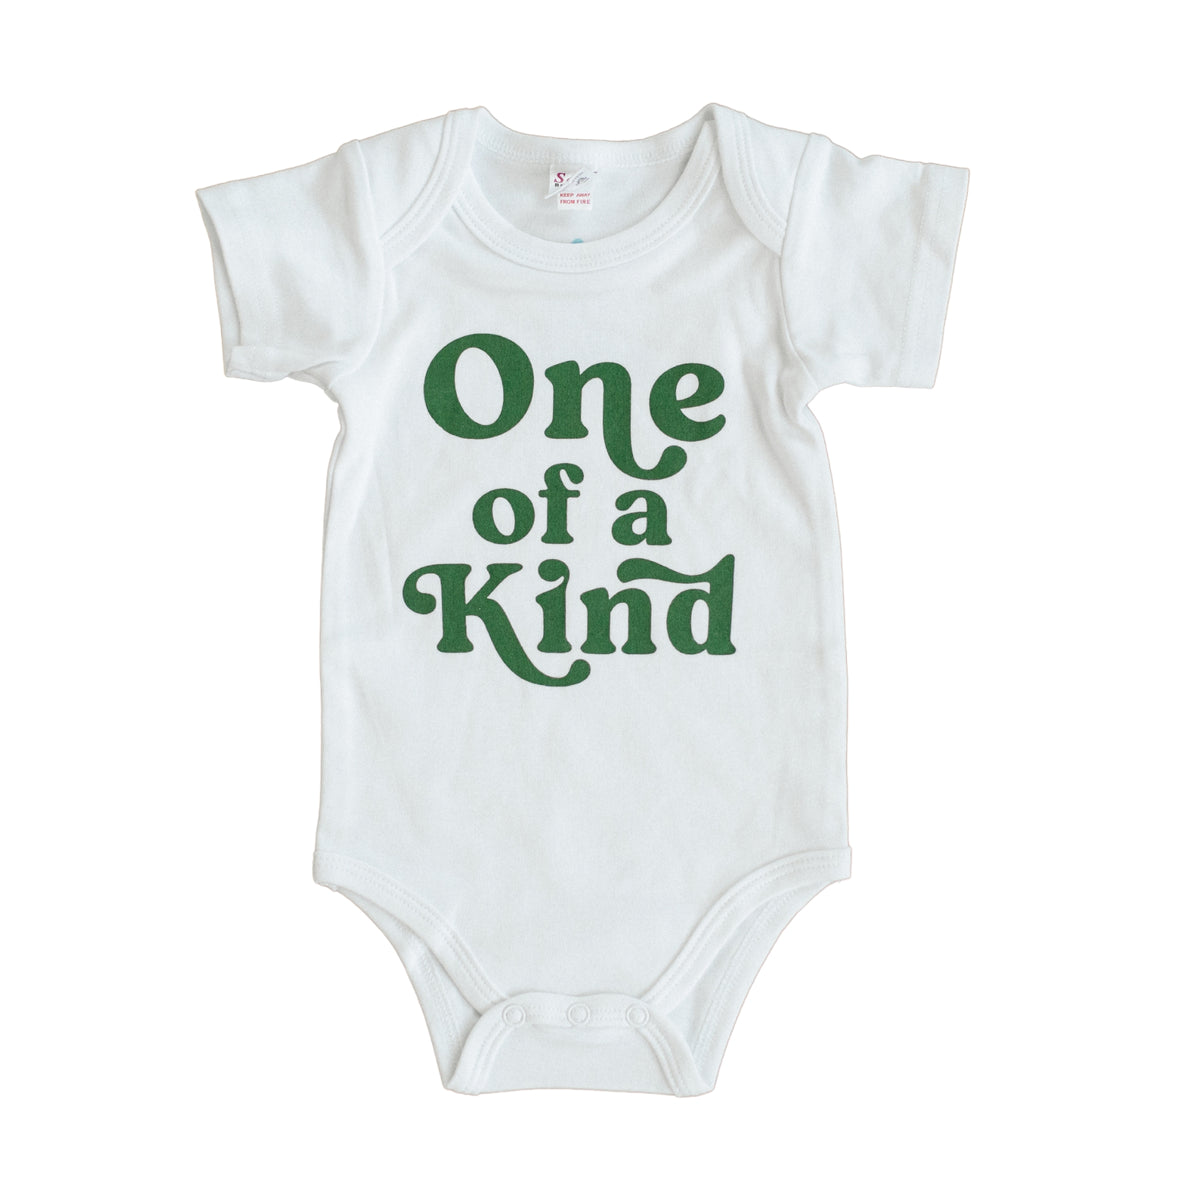 One of a Kind Baby Onesie